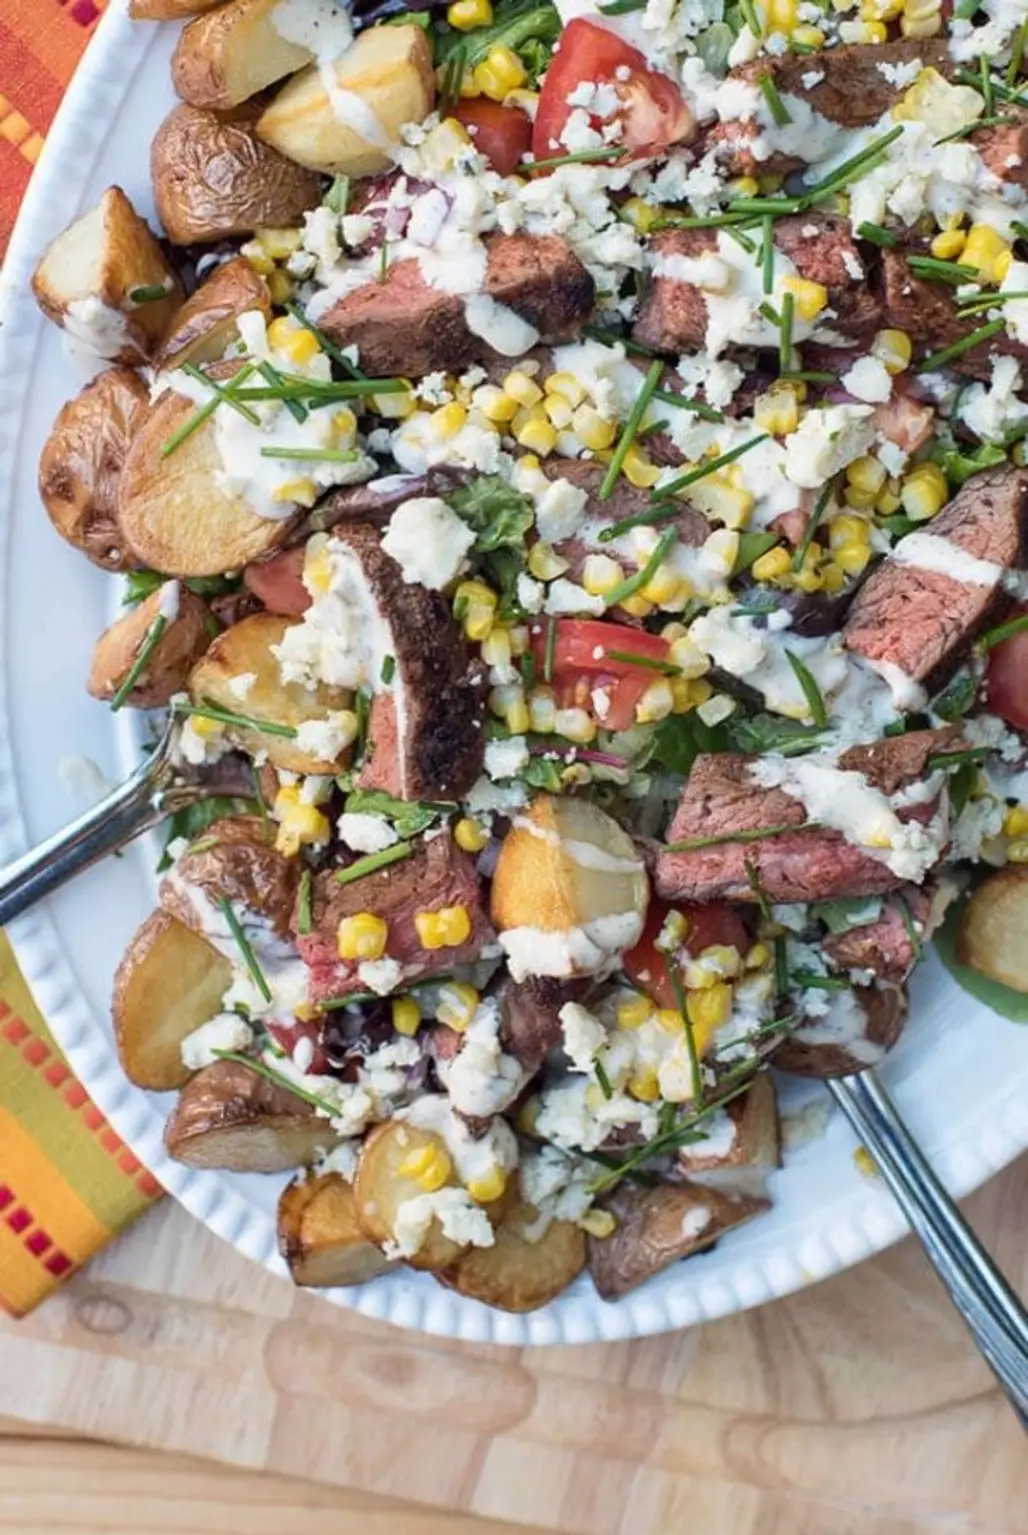 Hearty Salad is Packed Full of Steak, Roasted Potatoes, and Grilled Corn